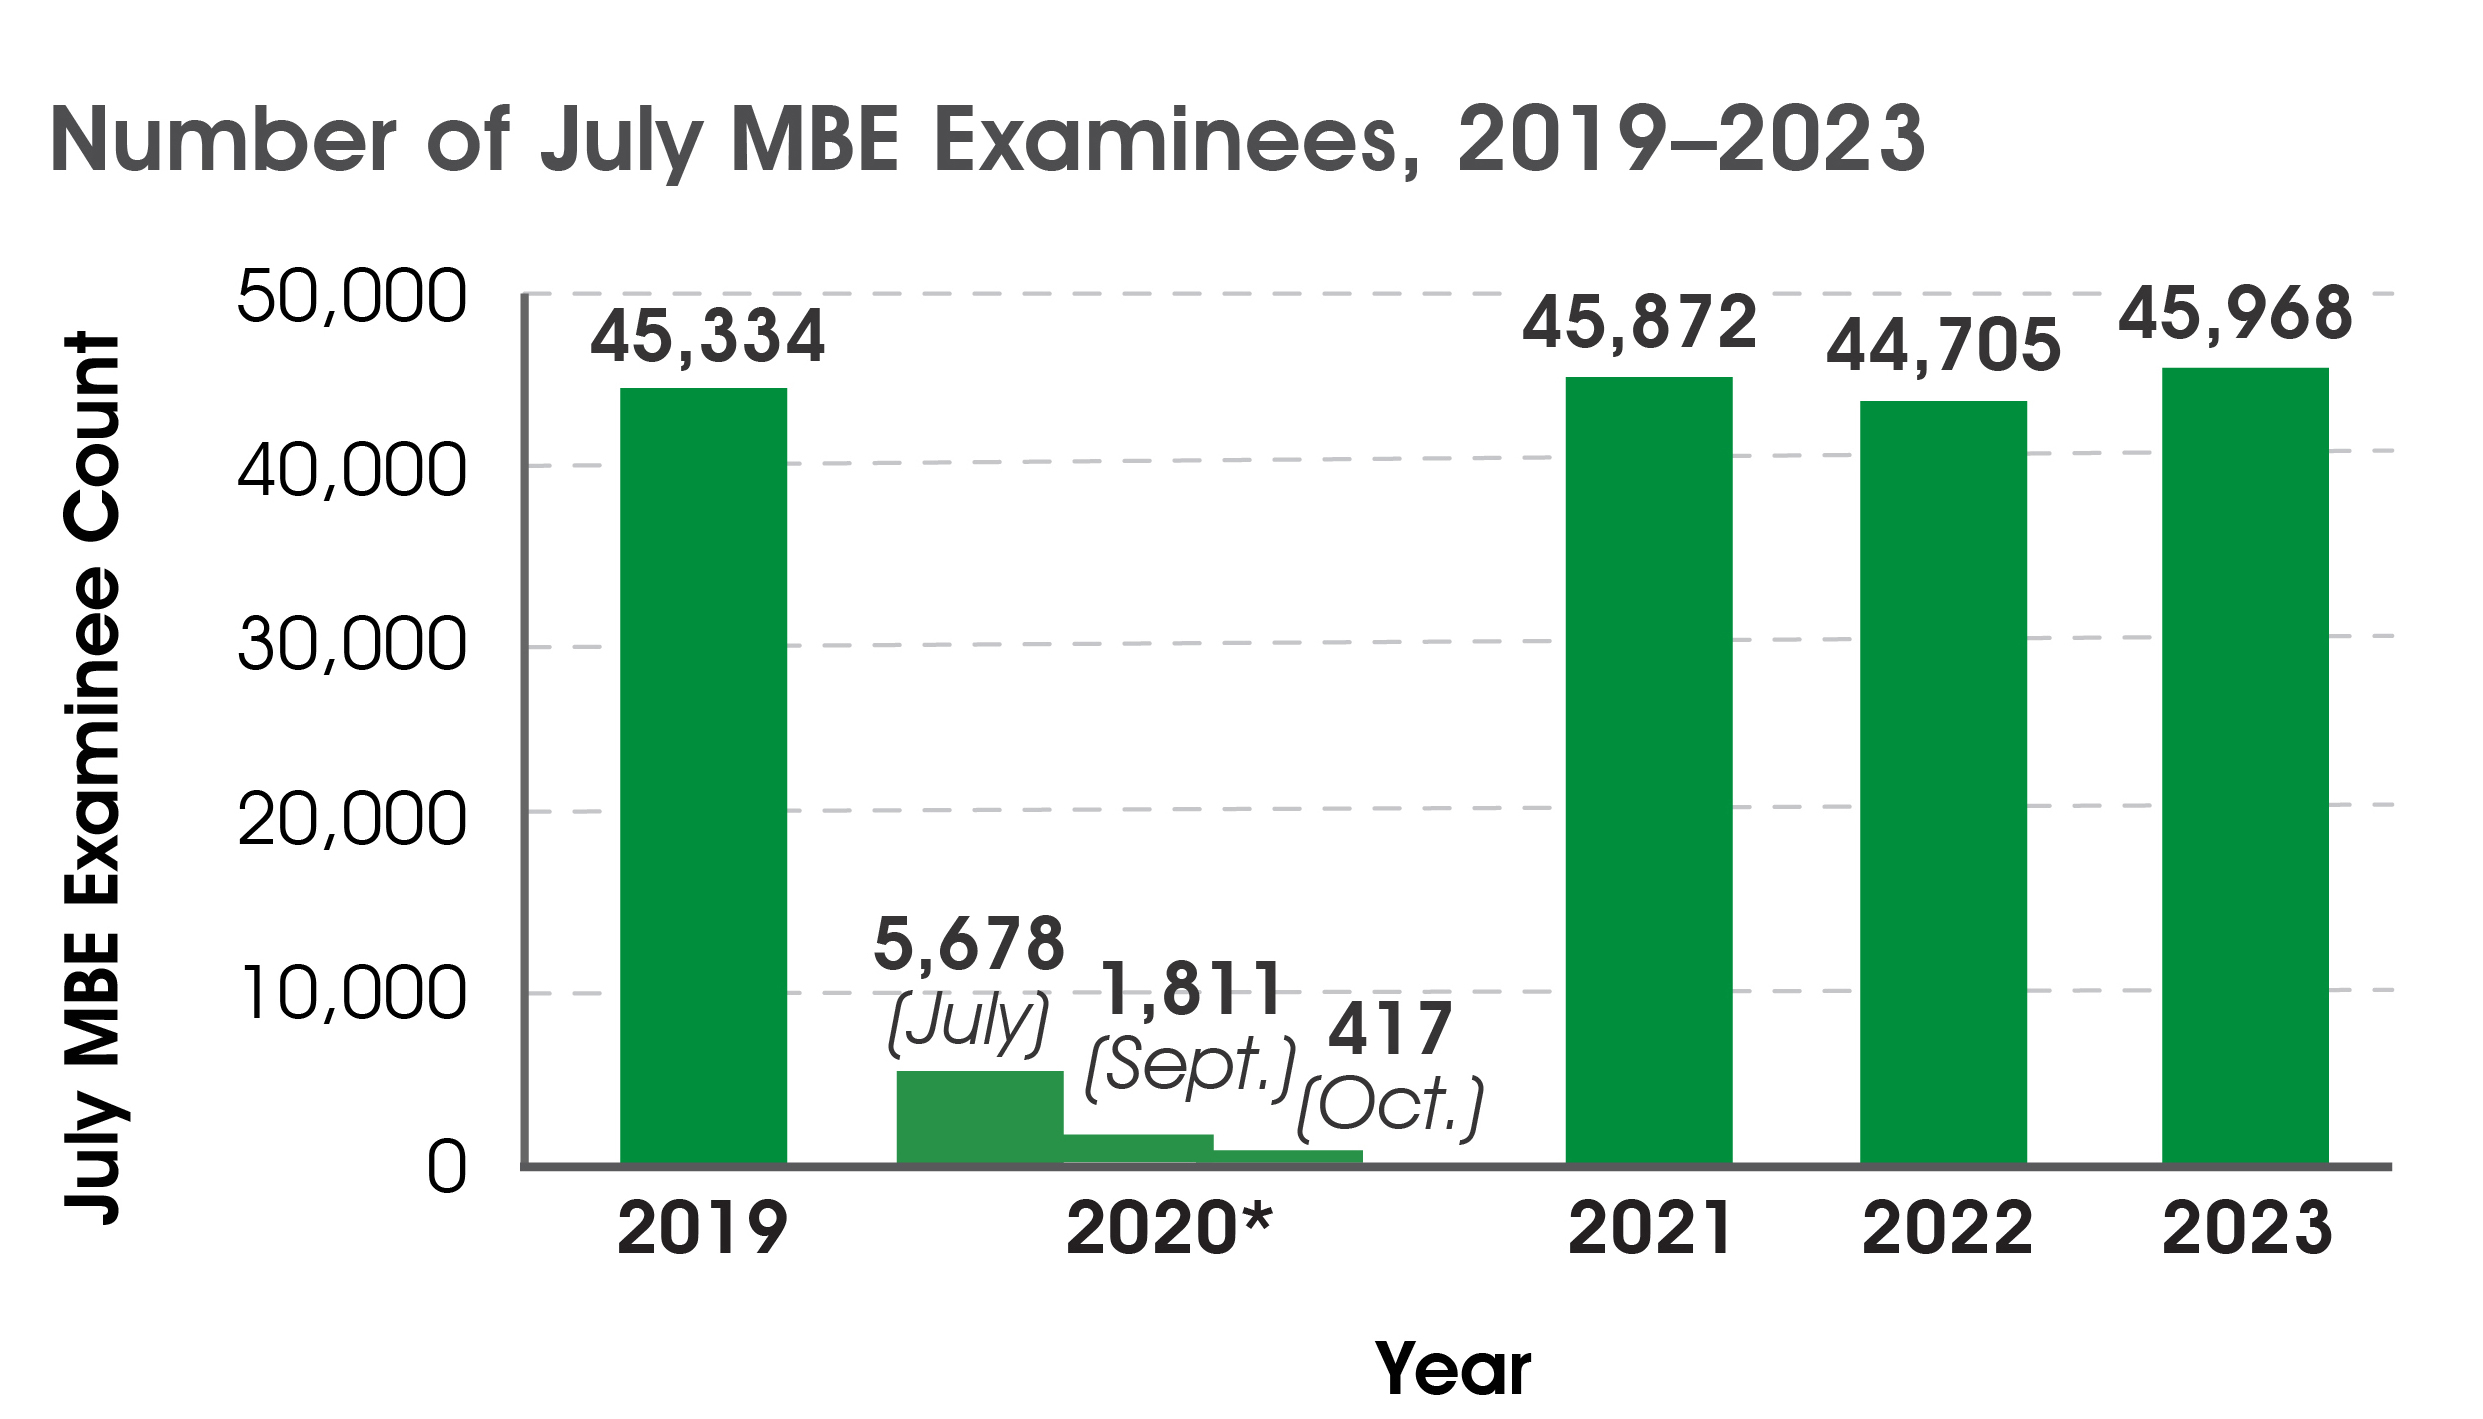 Bar graph of 2019-2023 July MBE national examinee counts. 2019 = 45,334; 2020 = 5,678 (July), 1,811 (Sept.), 417 (Oct.); 2021 = 45,872; 2022 = 44,705; 2023 = 45,968.